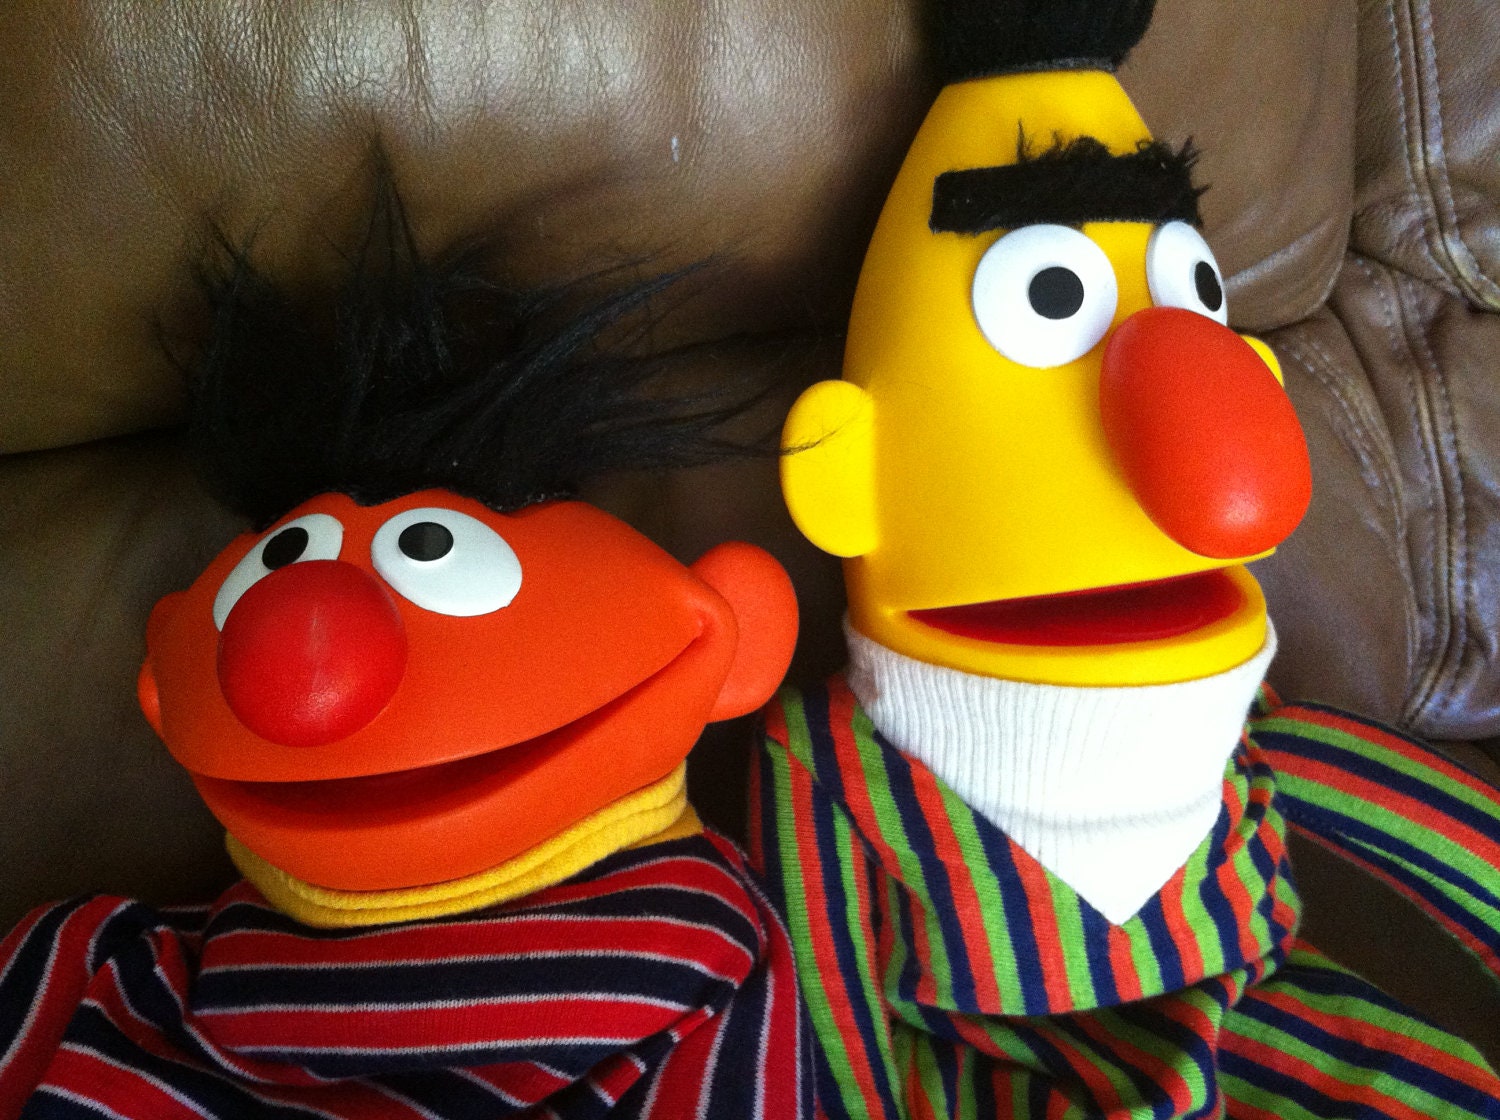 Bert And Ernie Are Gay Says Writer But Sesame Street Insist They're Just Non